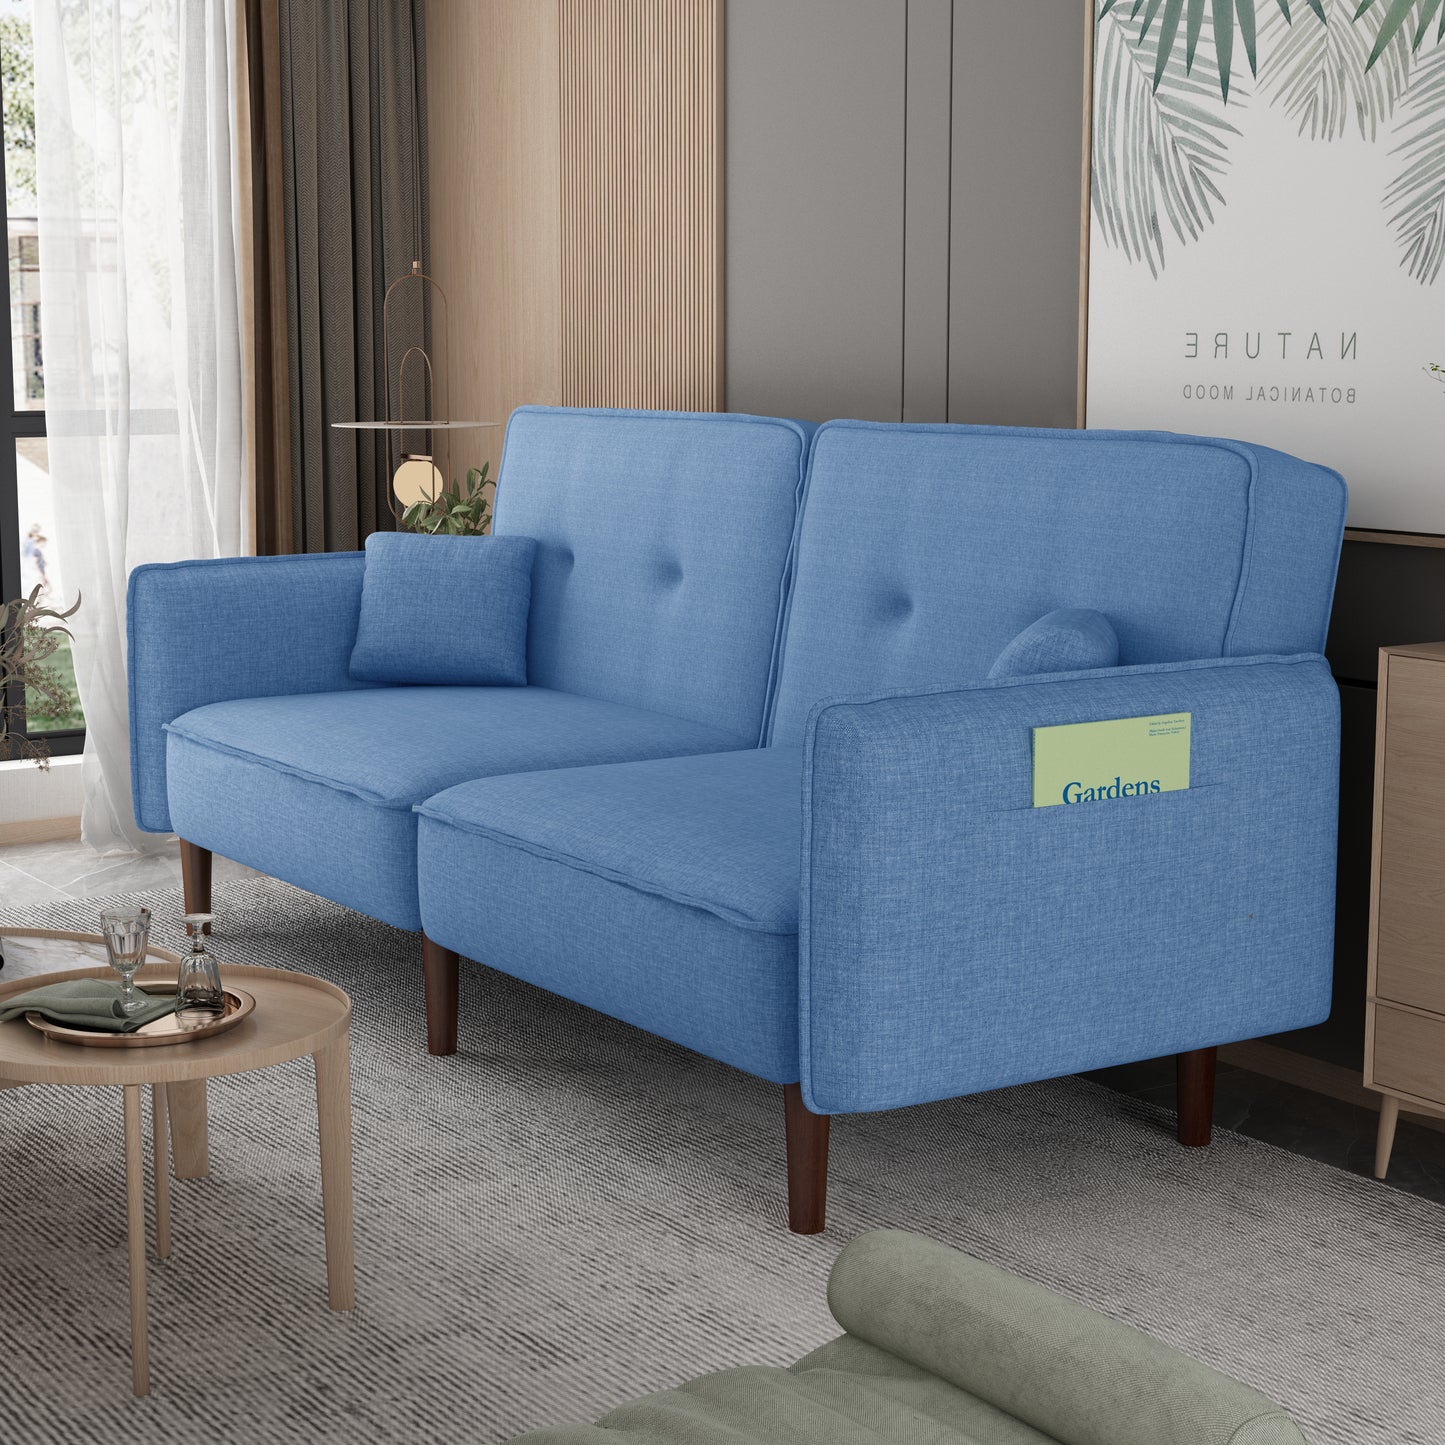 Living Room Bed Room Leisure Futon Sofa bed in Blue Fabric with Solid Wood Leg